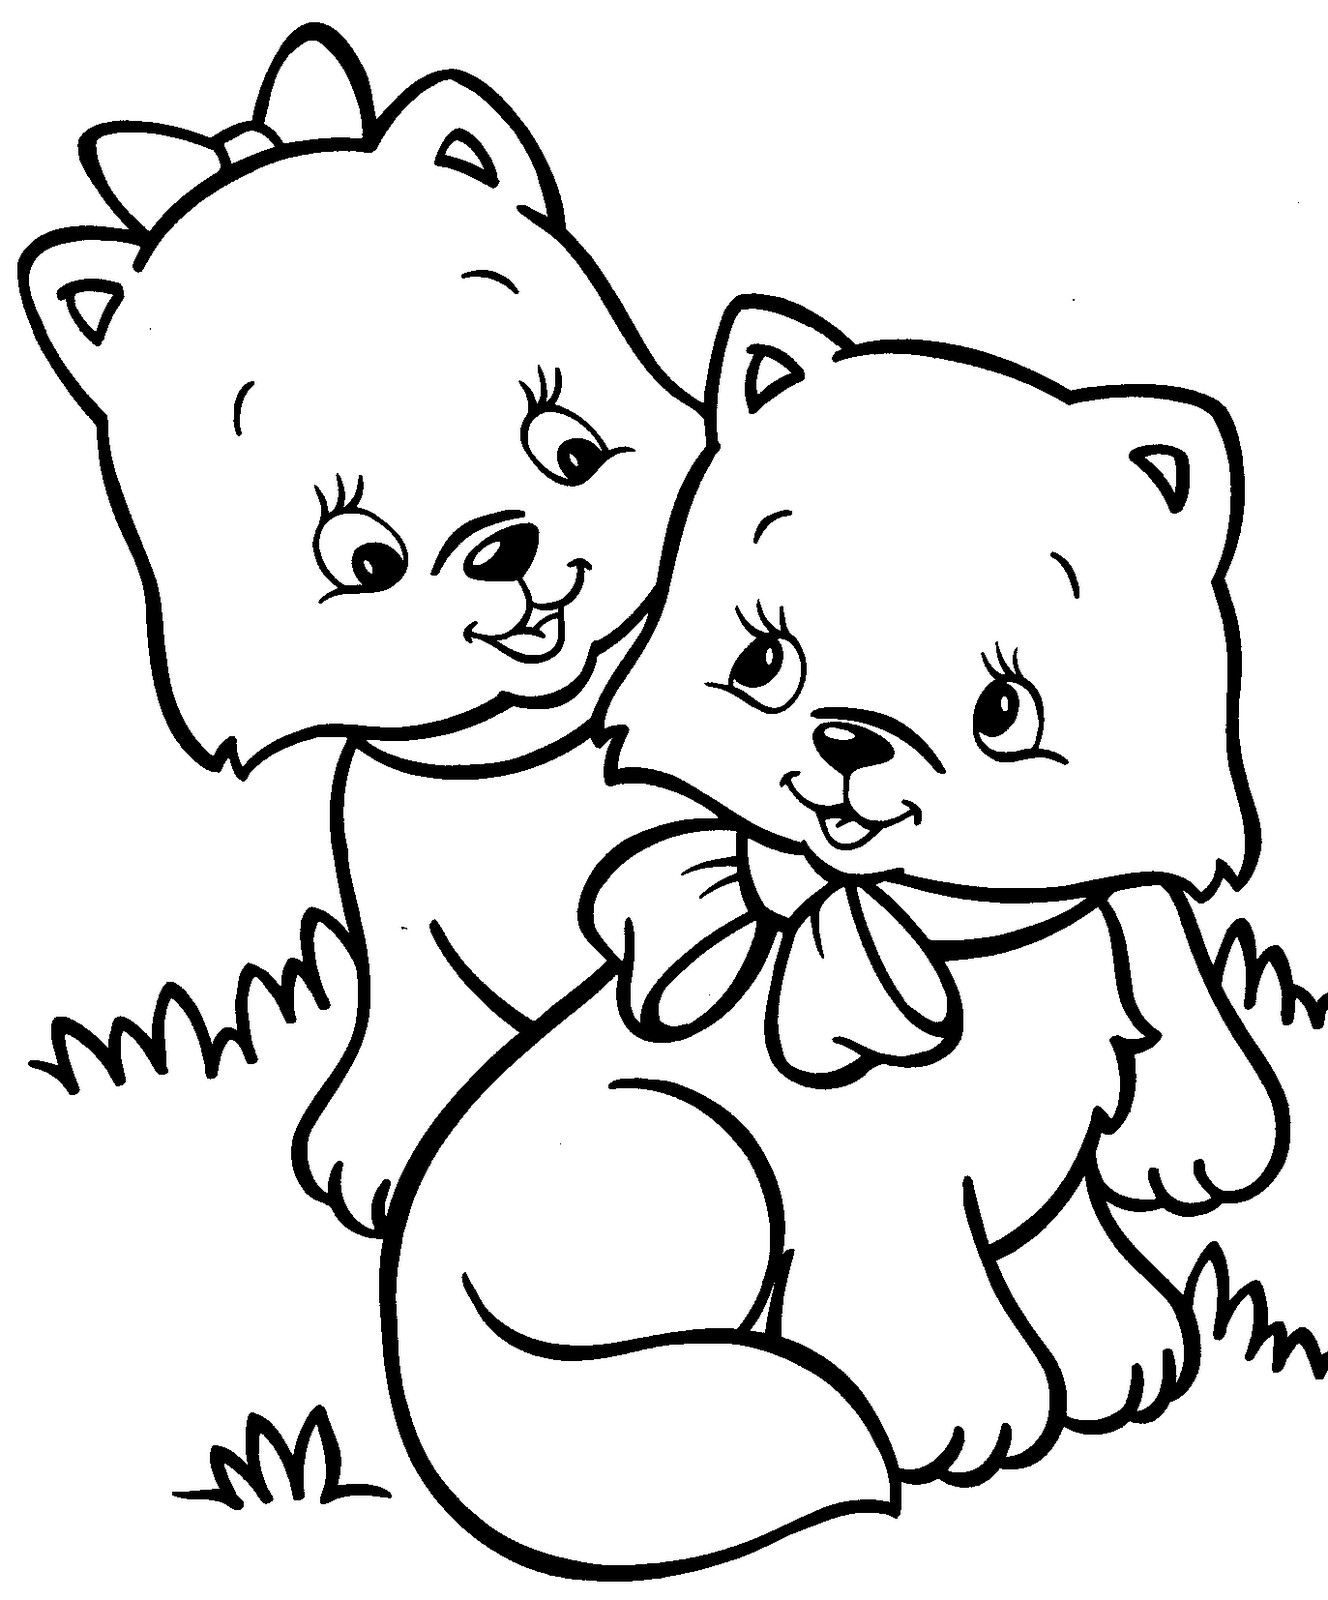 Kitten Coloring Pages For Kids
 Kitten Coloring Pages Best Coloring Pages For Kids